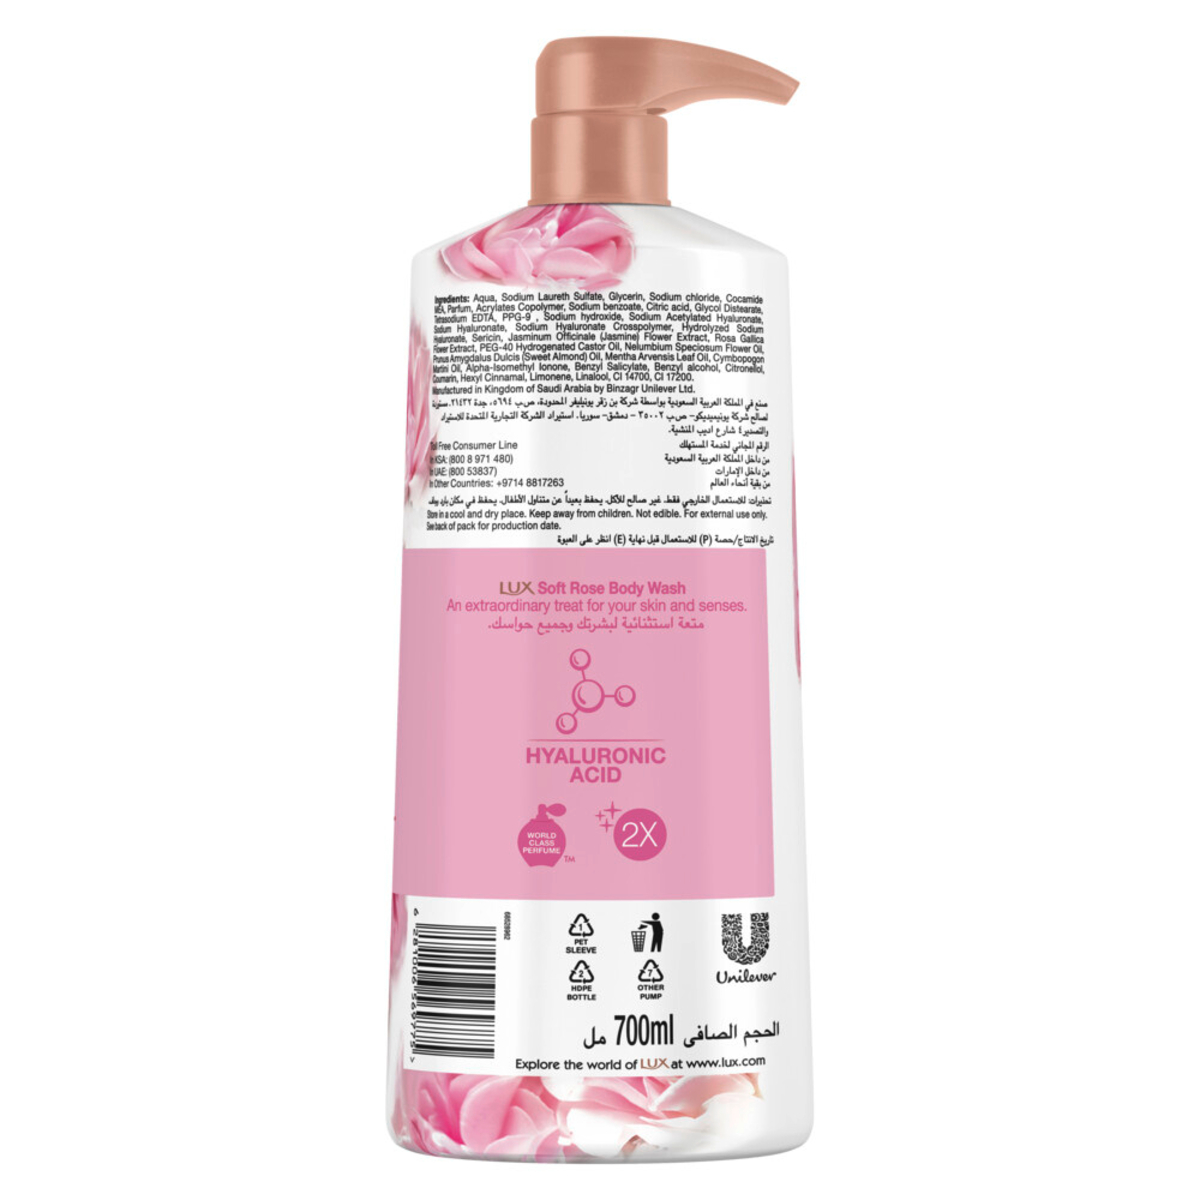 Lux Body Wash Soft Rose Delicate Fragrance 700 ml